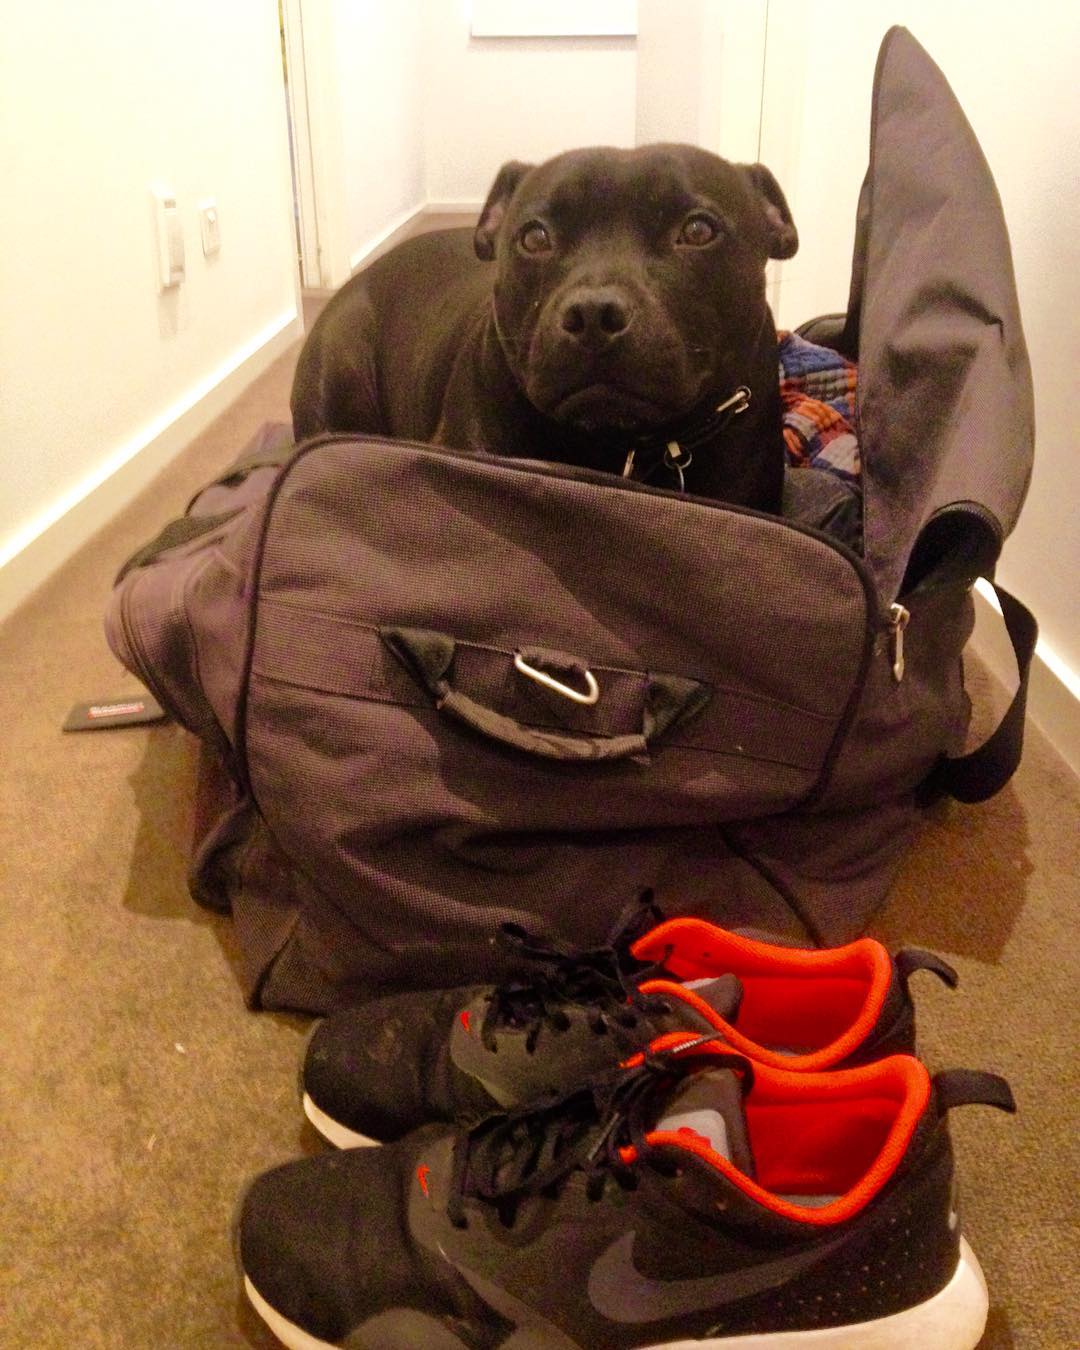 "I don't think I'm going to be able to come on the trip because I can't fit in this suitcase."